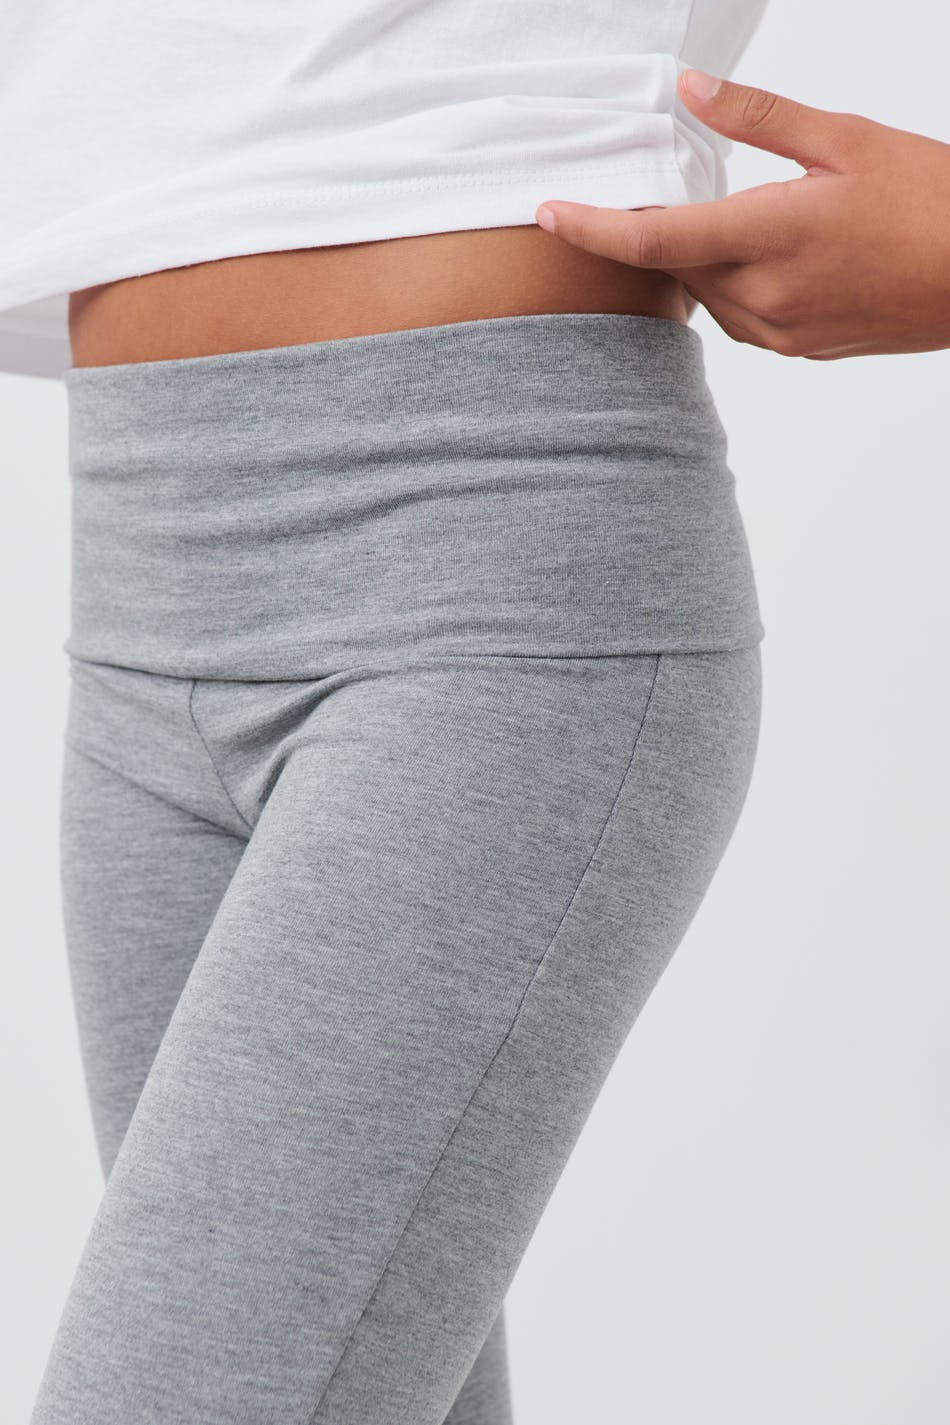 Women's Sexy Yoga Leggings - Gray and Black / High Waisted